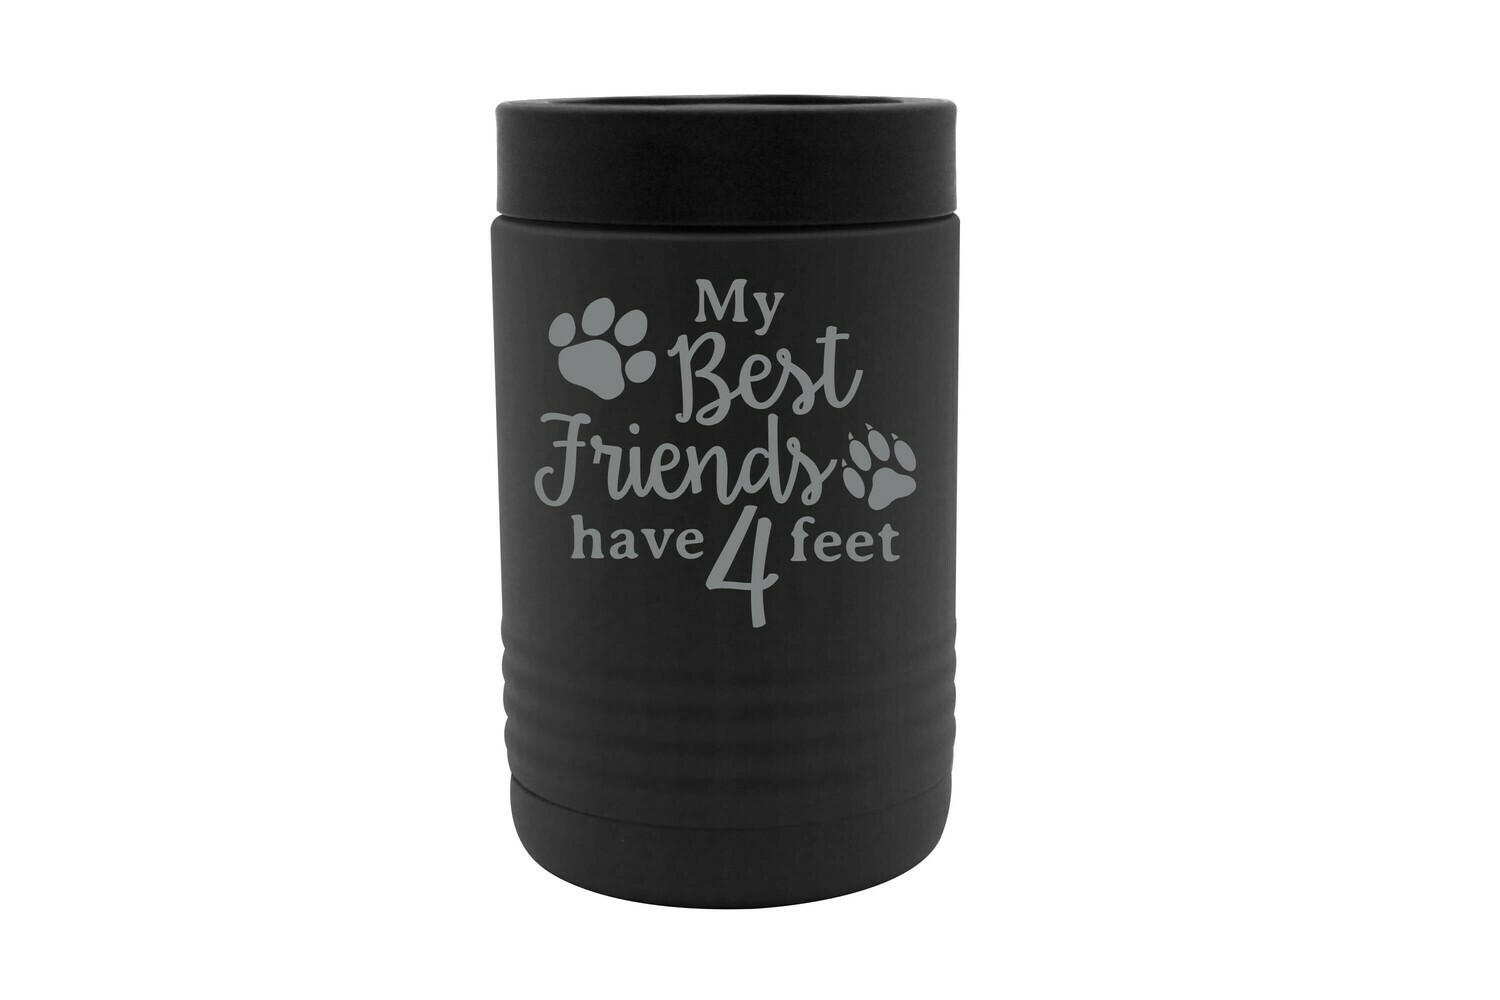 My Best Friends have 4 Feet Personalized Insulated Beverage Holder